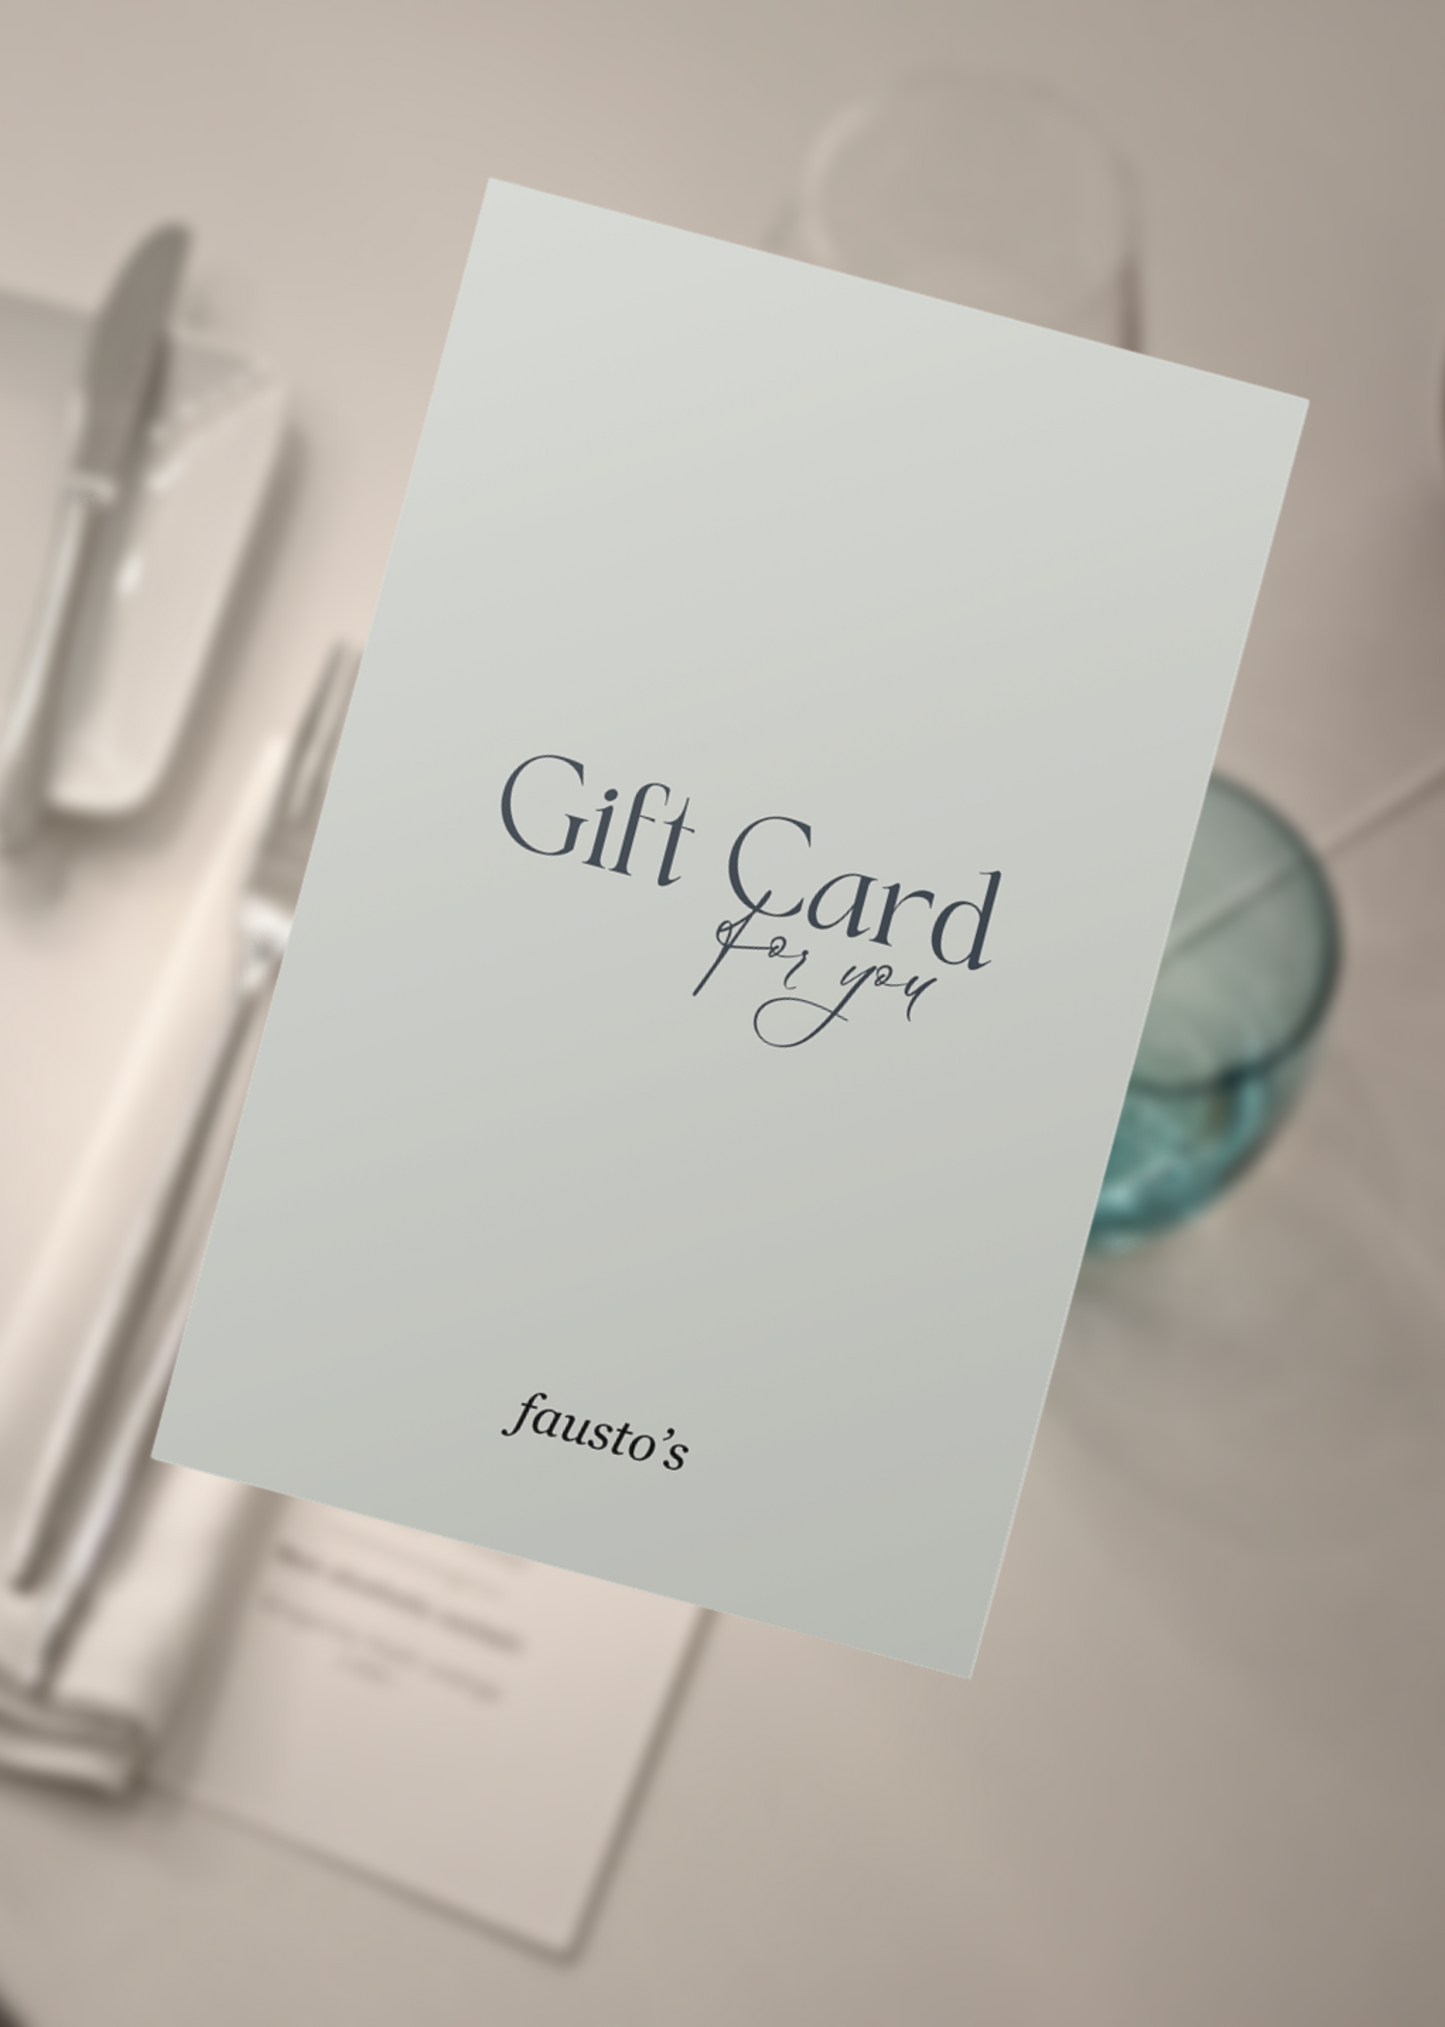 Fausto's Signature gift card - with wine list